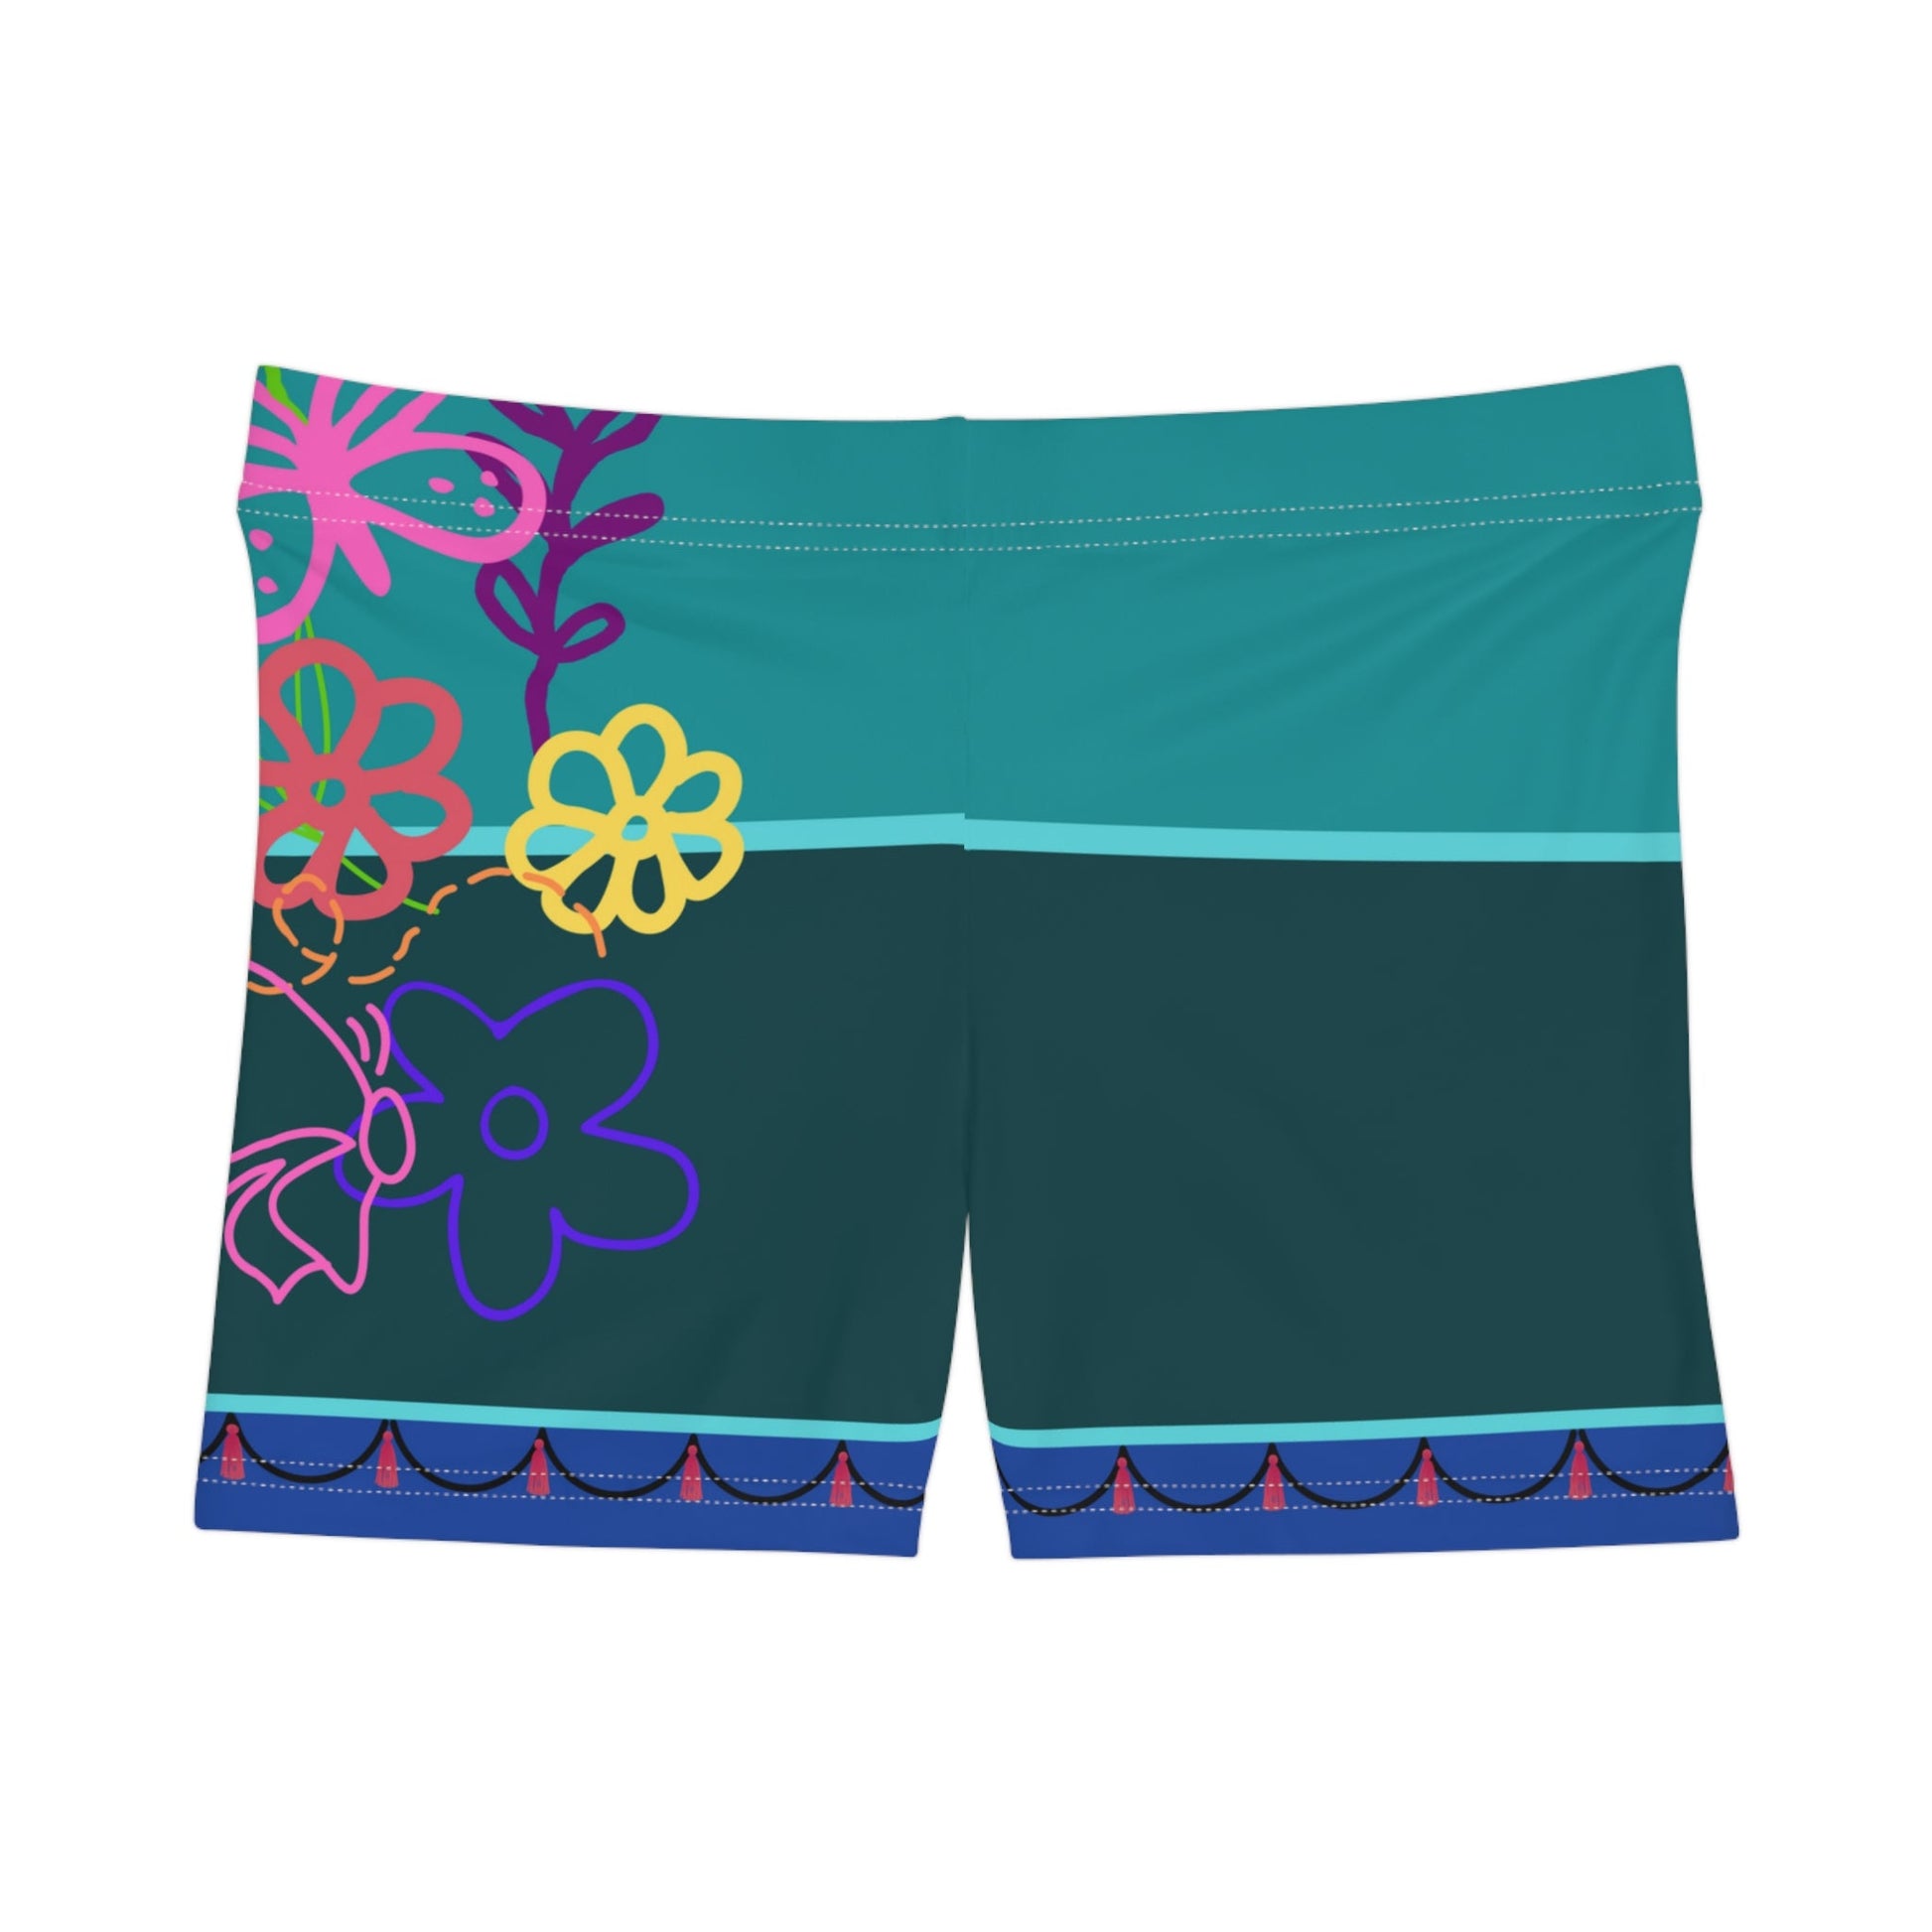 The Asha Women’s Recycled Athletic Shorts